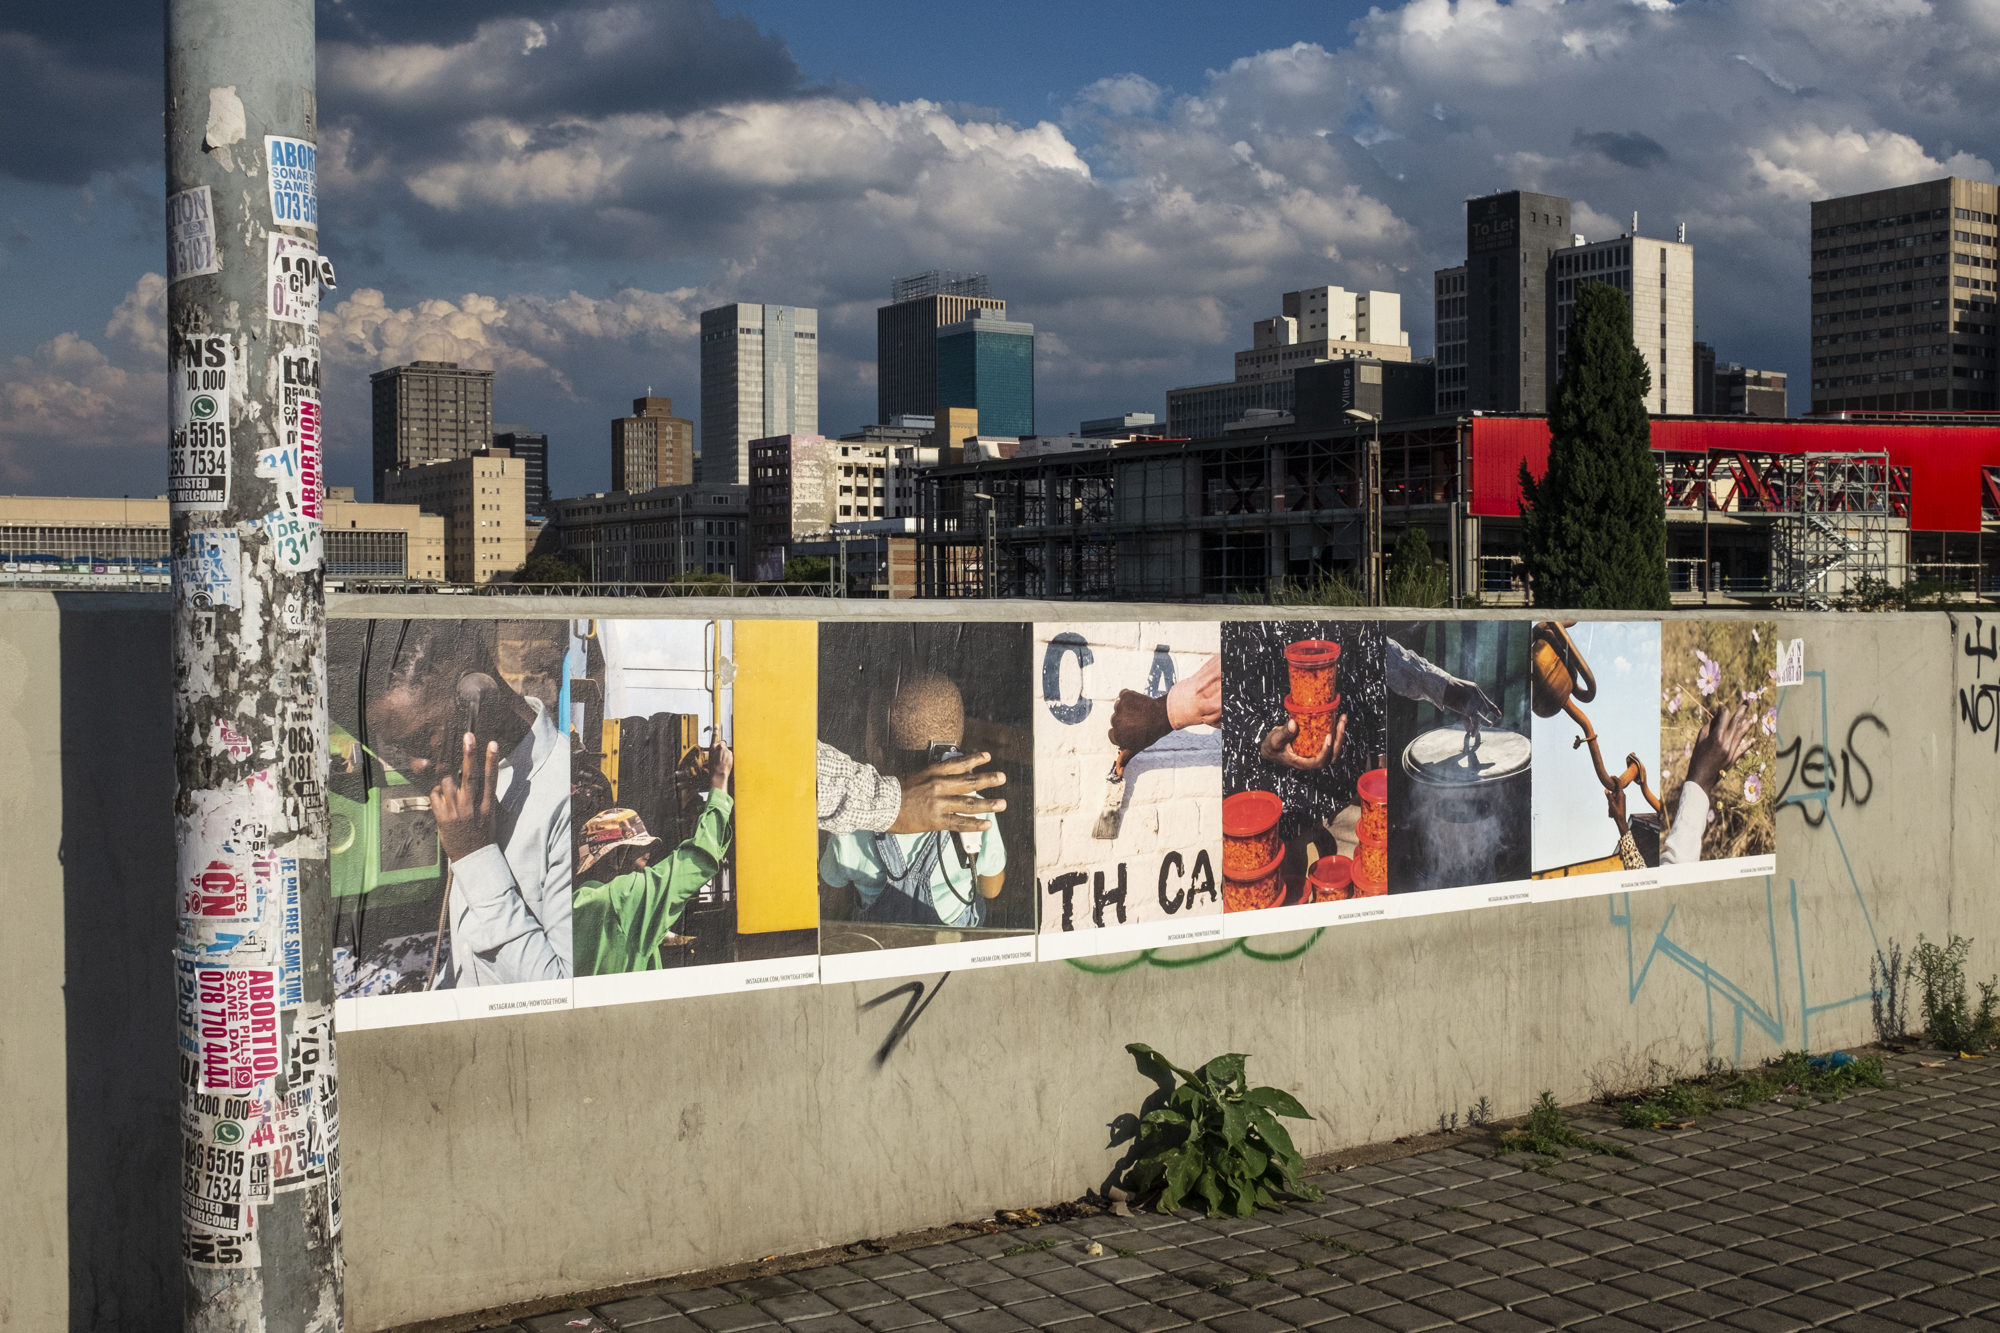 Documentation of the street art exhibition of "How to get home" in Johannesburg, South Africa, November 2019, funded by the Stiftung Kulturwerk Grant.   Poster set in Johannesburg CBD, Queen Elizabeth Bridge on Nov 23rd, 2019.